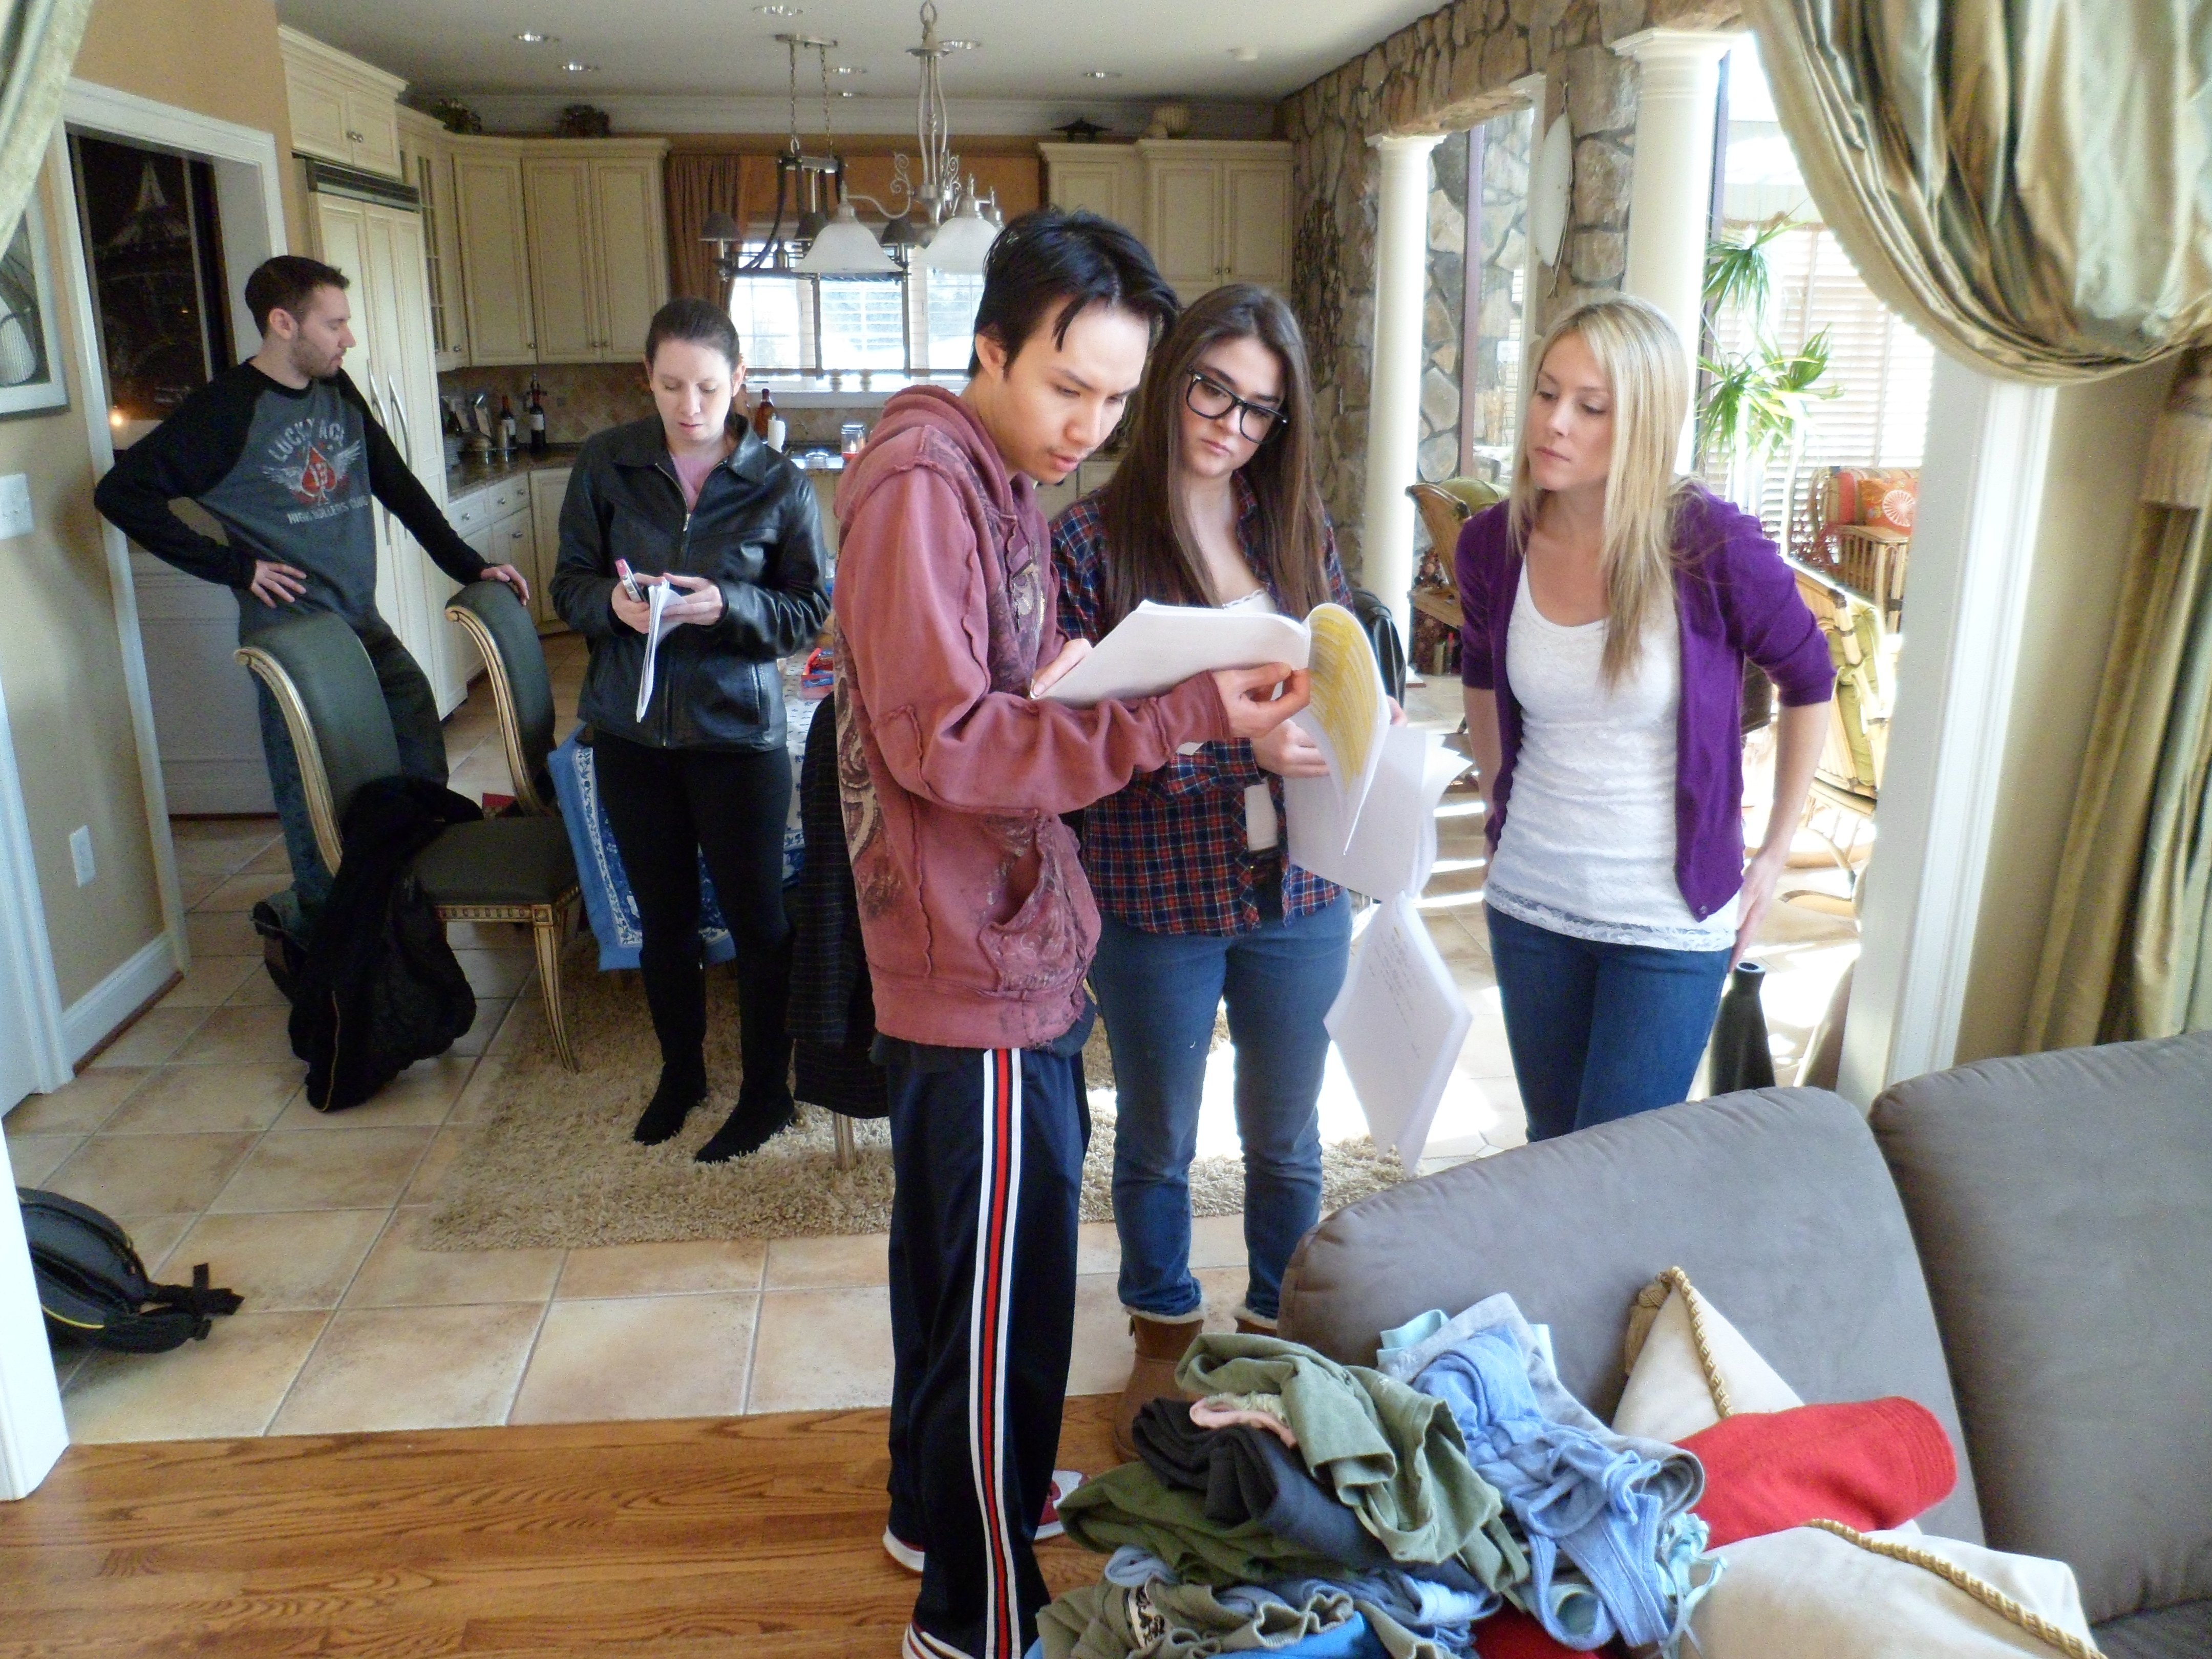 On set of Murky with actresses Molly MacKenzie and Megan Caulfield.